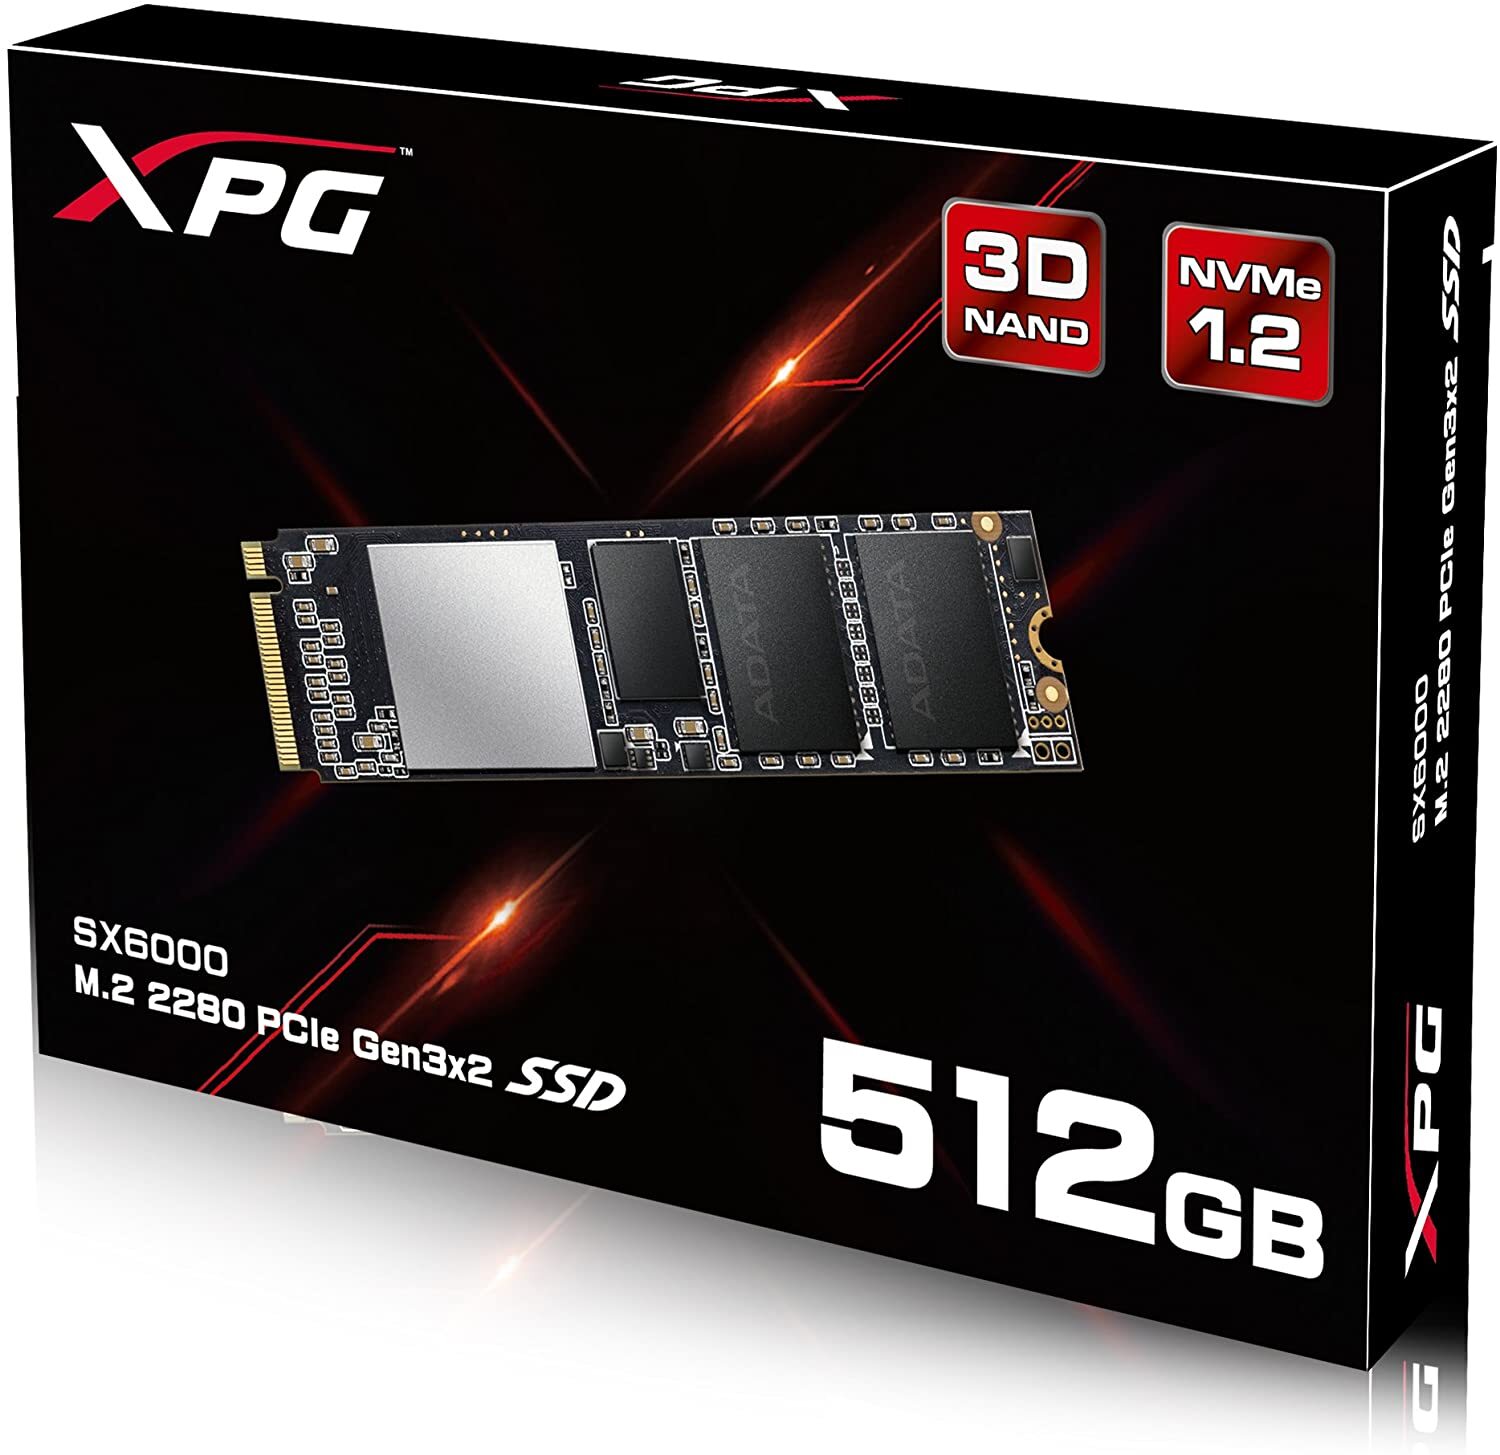 ADATA XPG SX6000 PCIe 512GB 3D NAND PCIe Gen3x4 M.2 2280 NVMe 1.2 R/W up to 1000/800MB/s Solid State Drive (ASX6000NP-512GT-C)